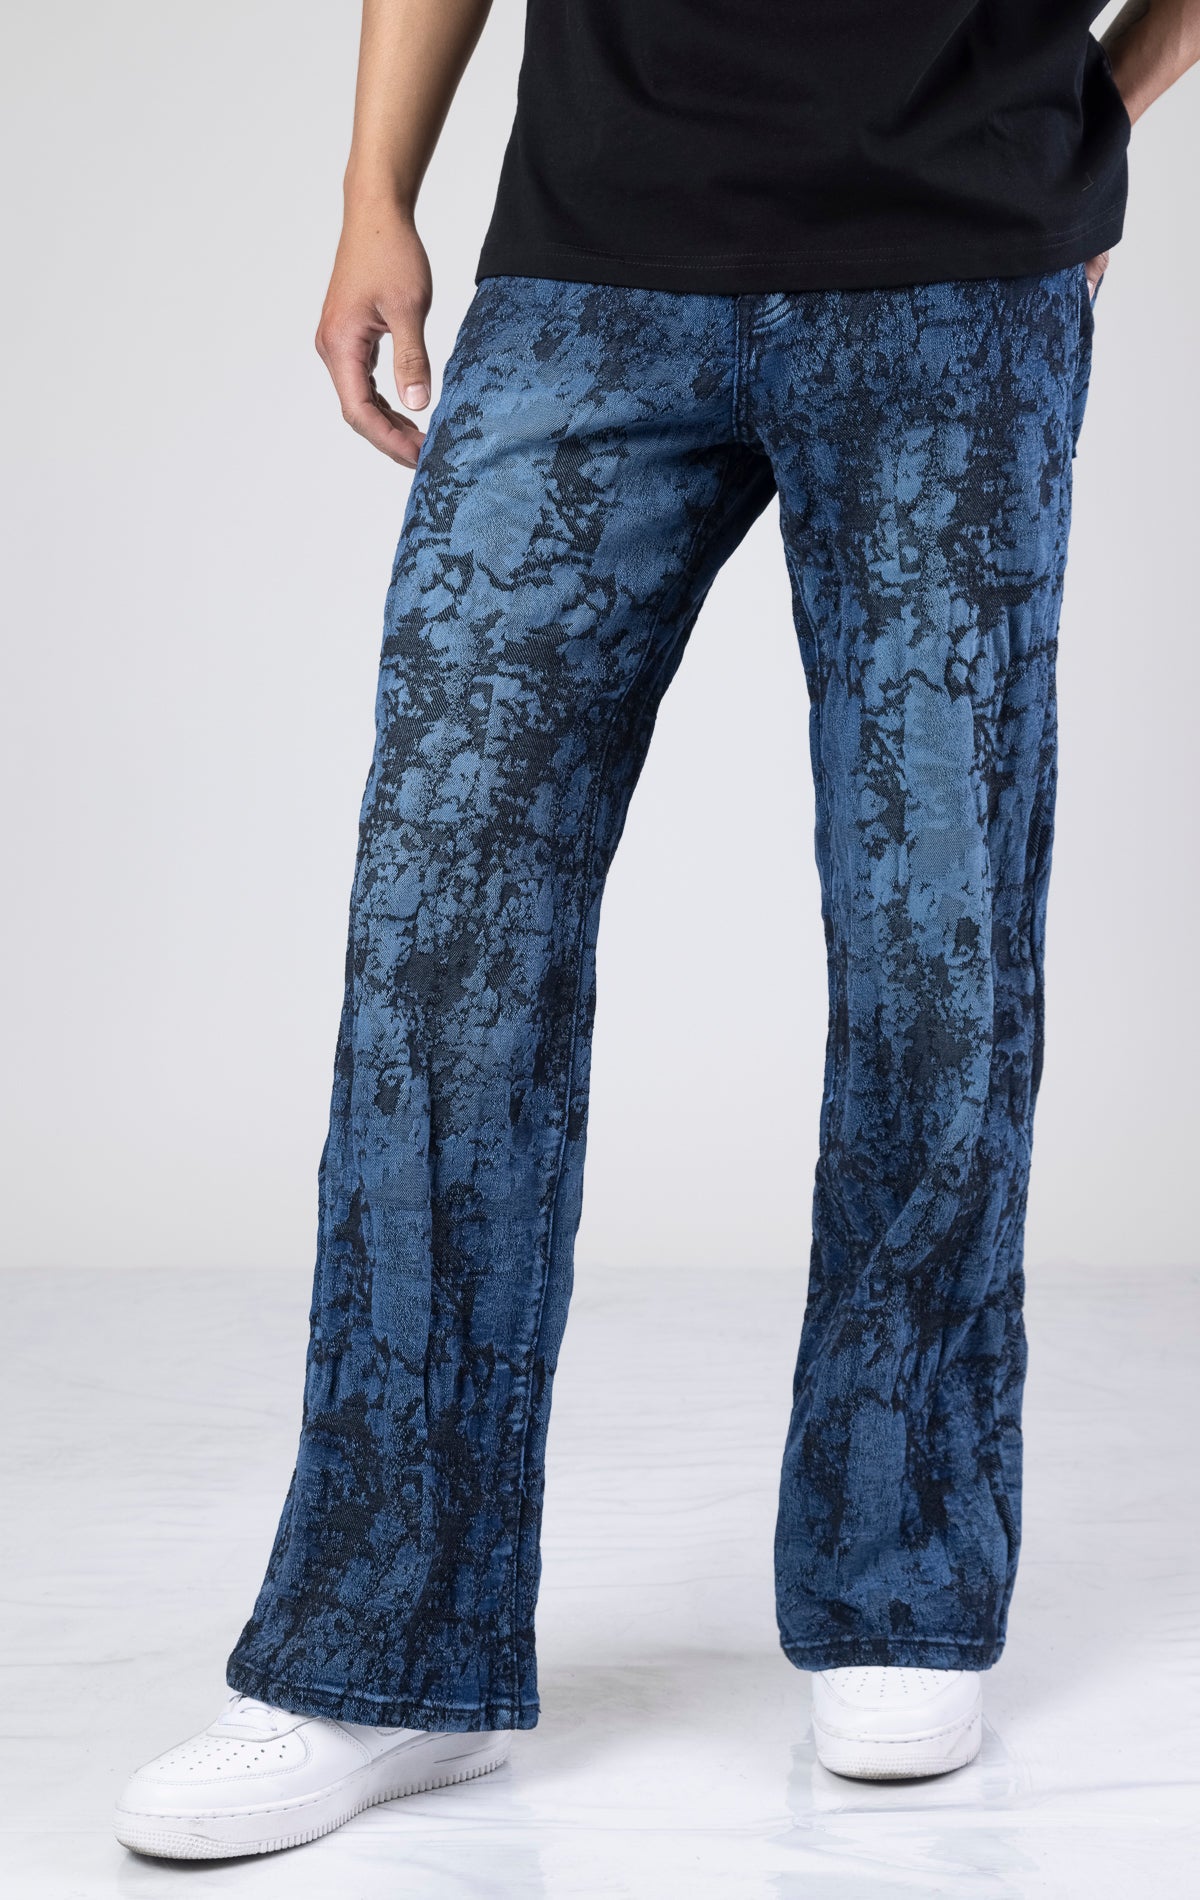 Relaxed fit baggy jeans in a vintage blue wash with a faded, worn-in look. Made with sturdy denim for long-lasting wear.